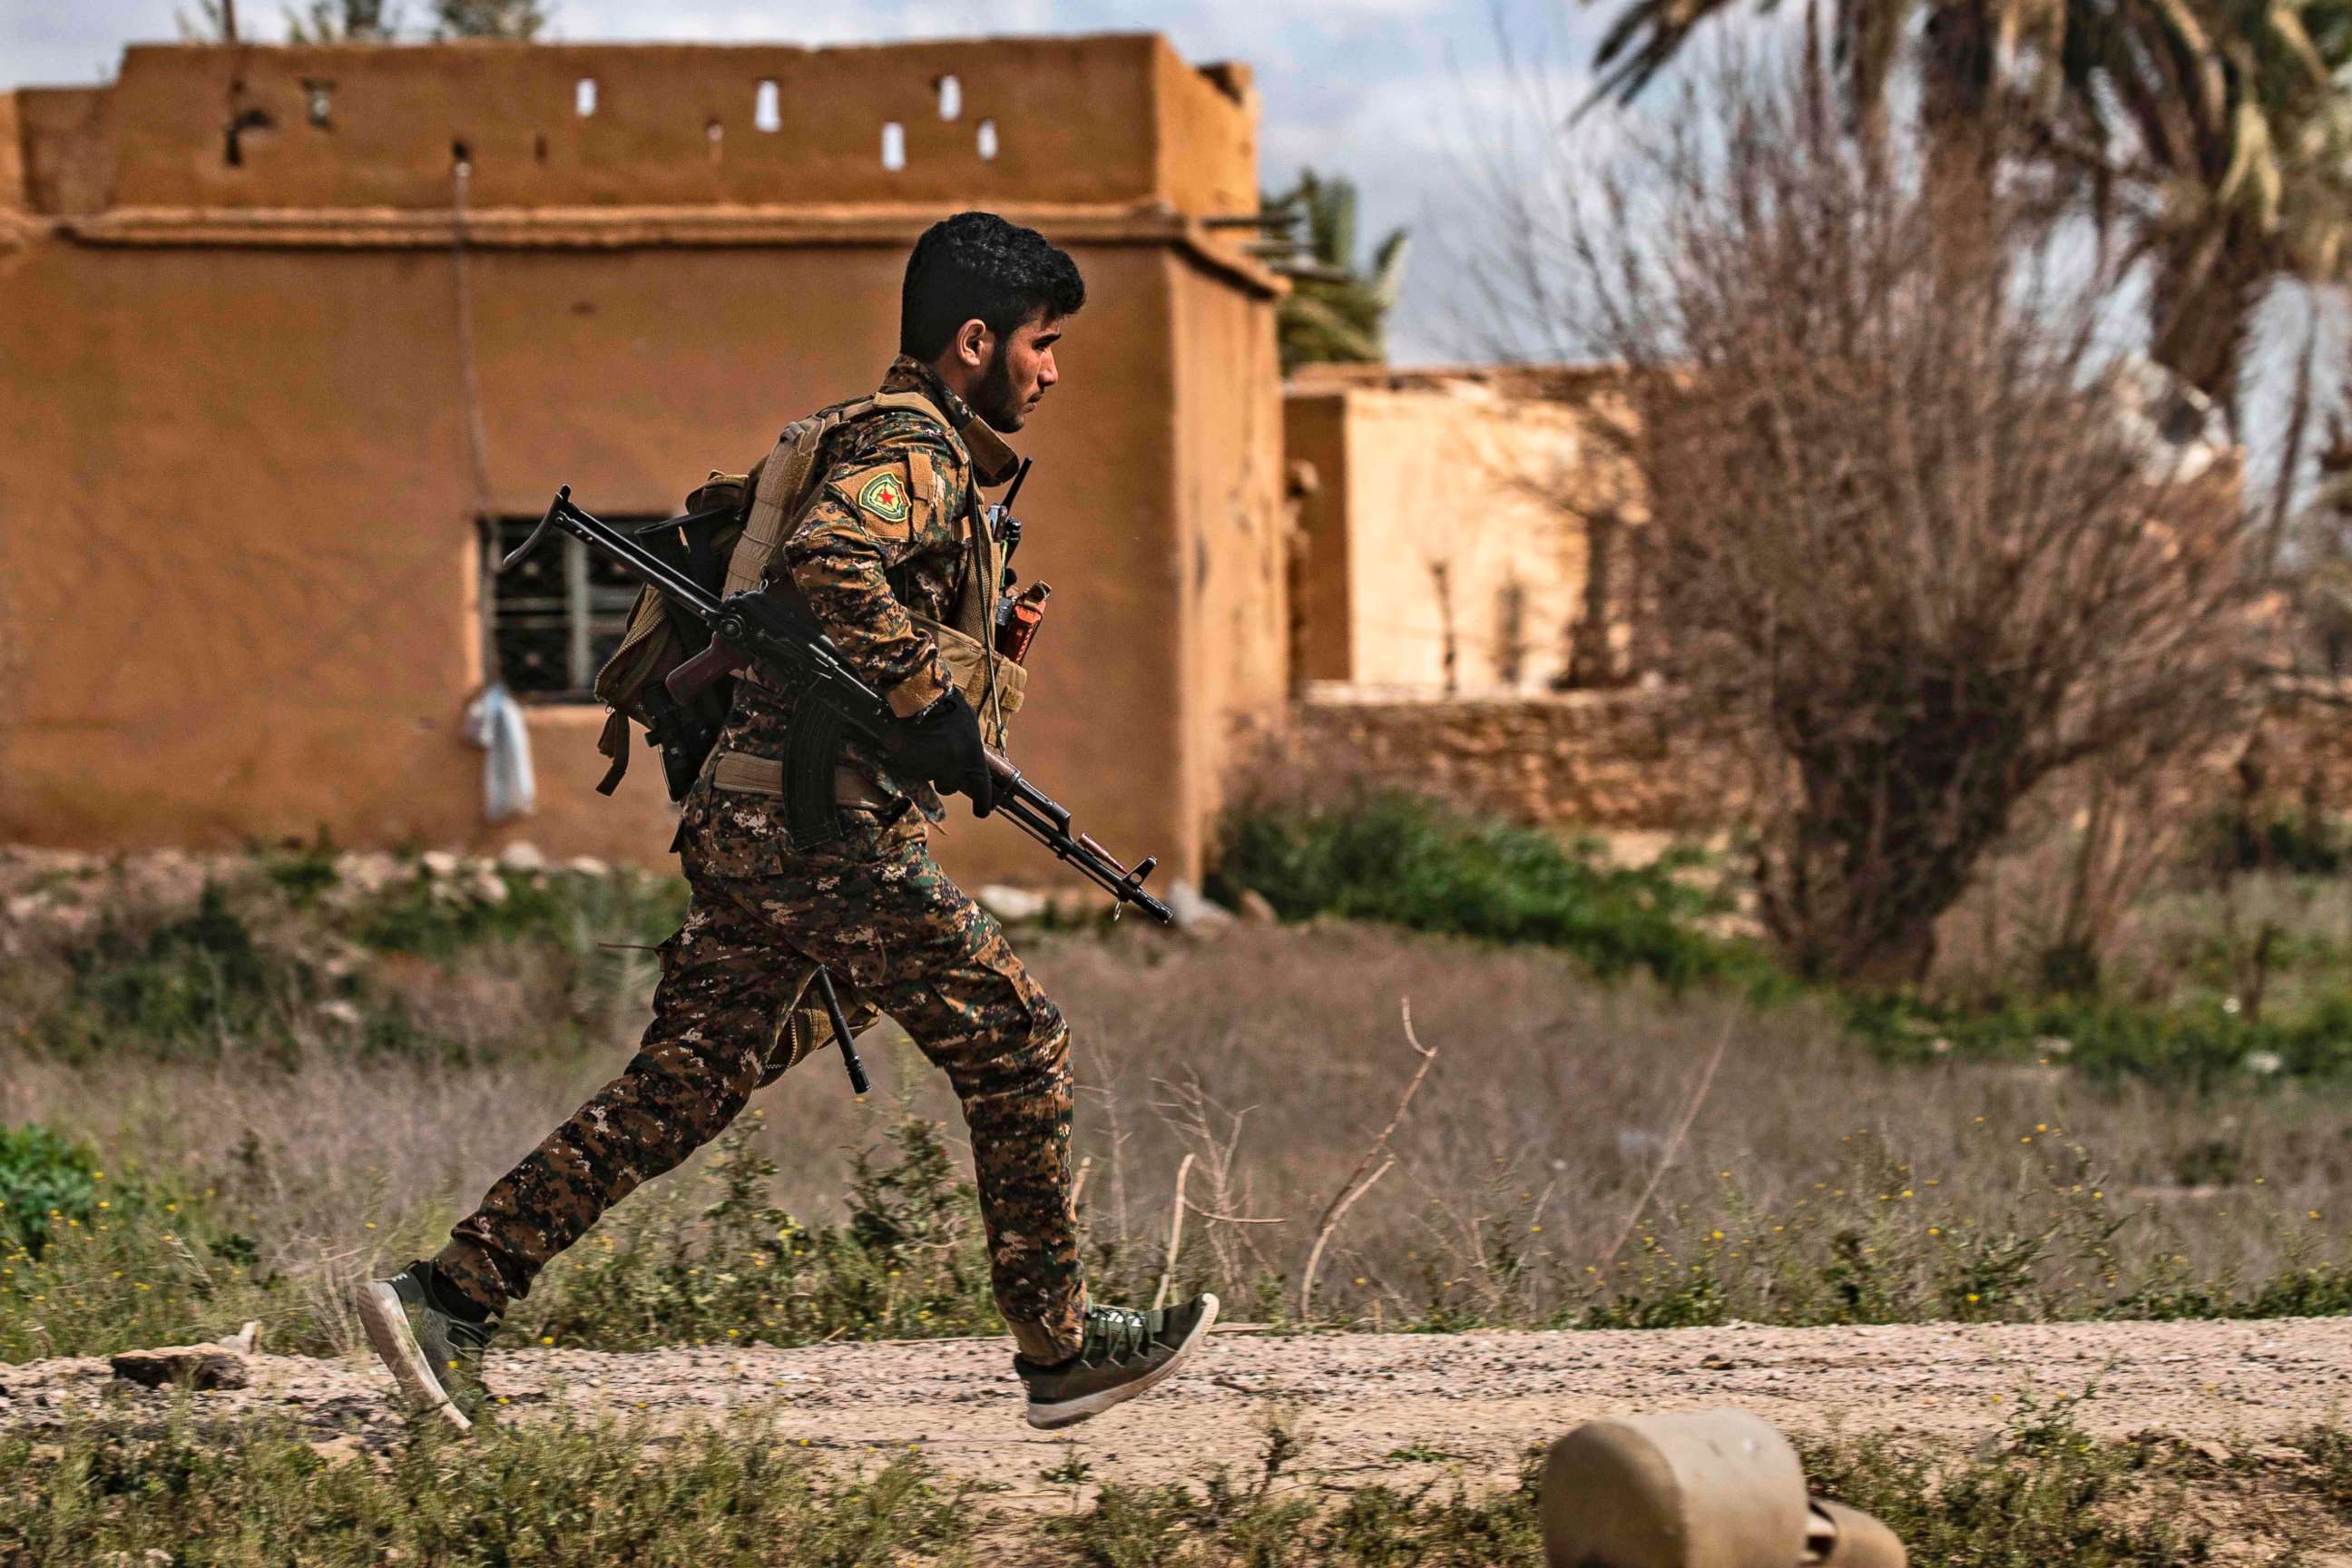 PHOTO: A member of the Syrian Democratic Forces (SDF) runs for cover during shelling on the Islamic State group's last holdout of Baghouz, in the eastern Syrian Deir Ezzor province, March 3, 2019.